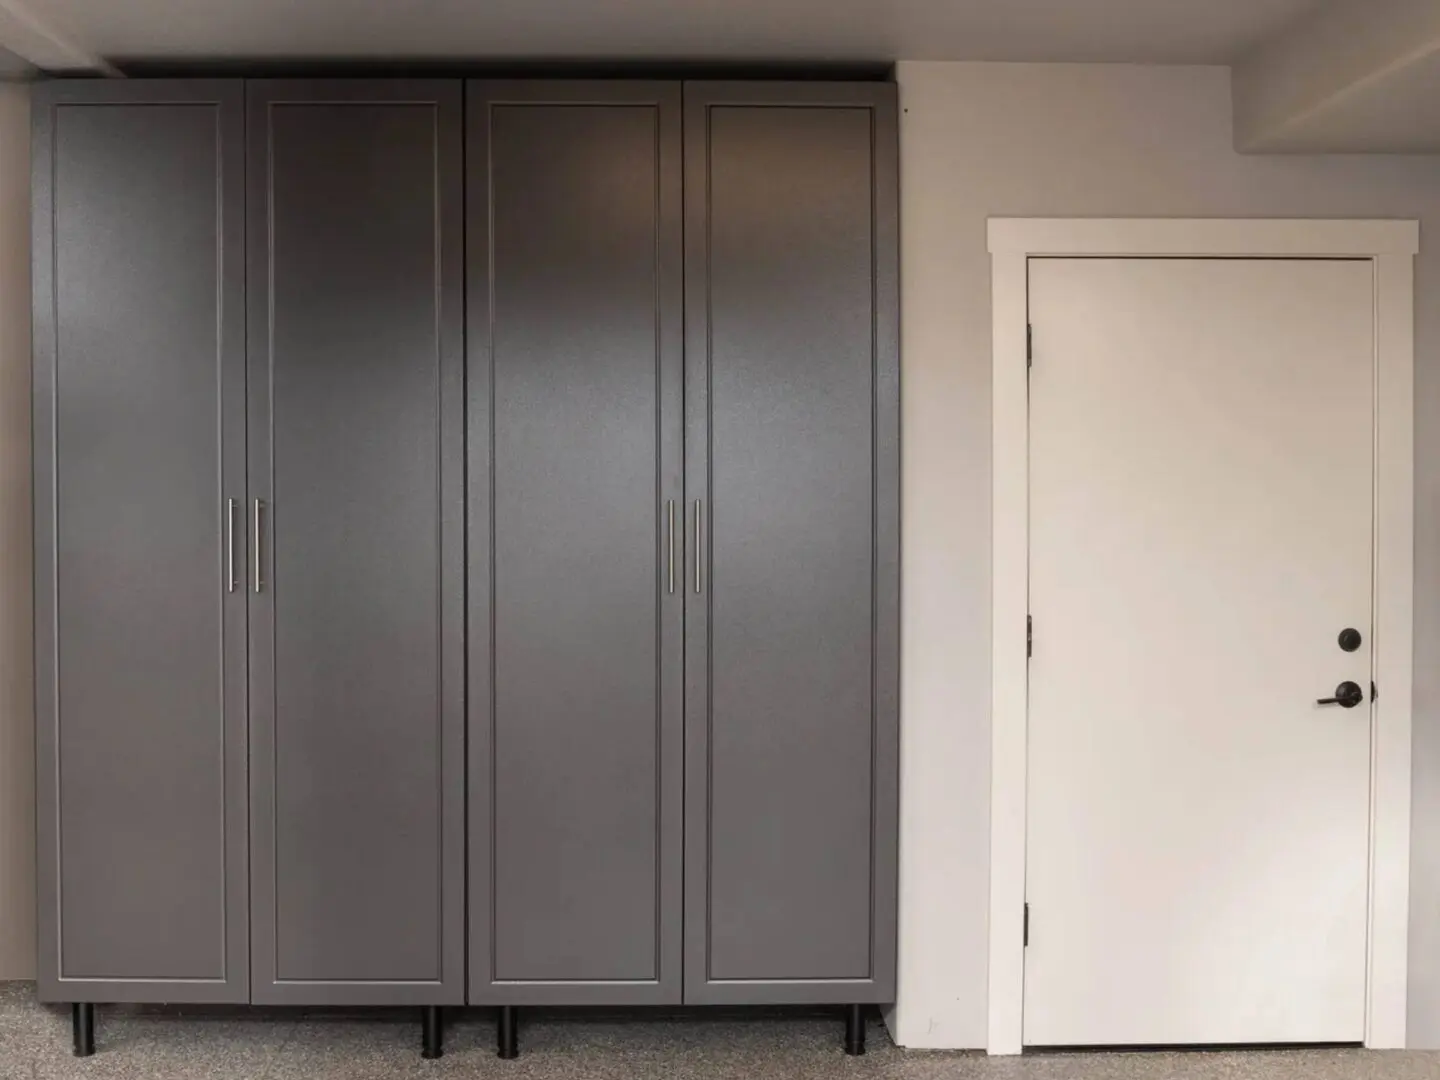 A room with three gray cabinets and a door.